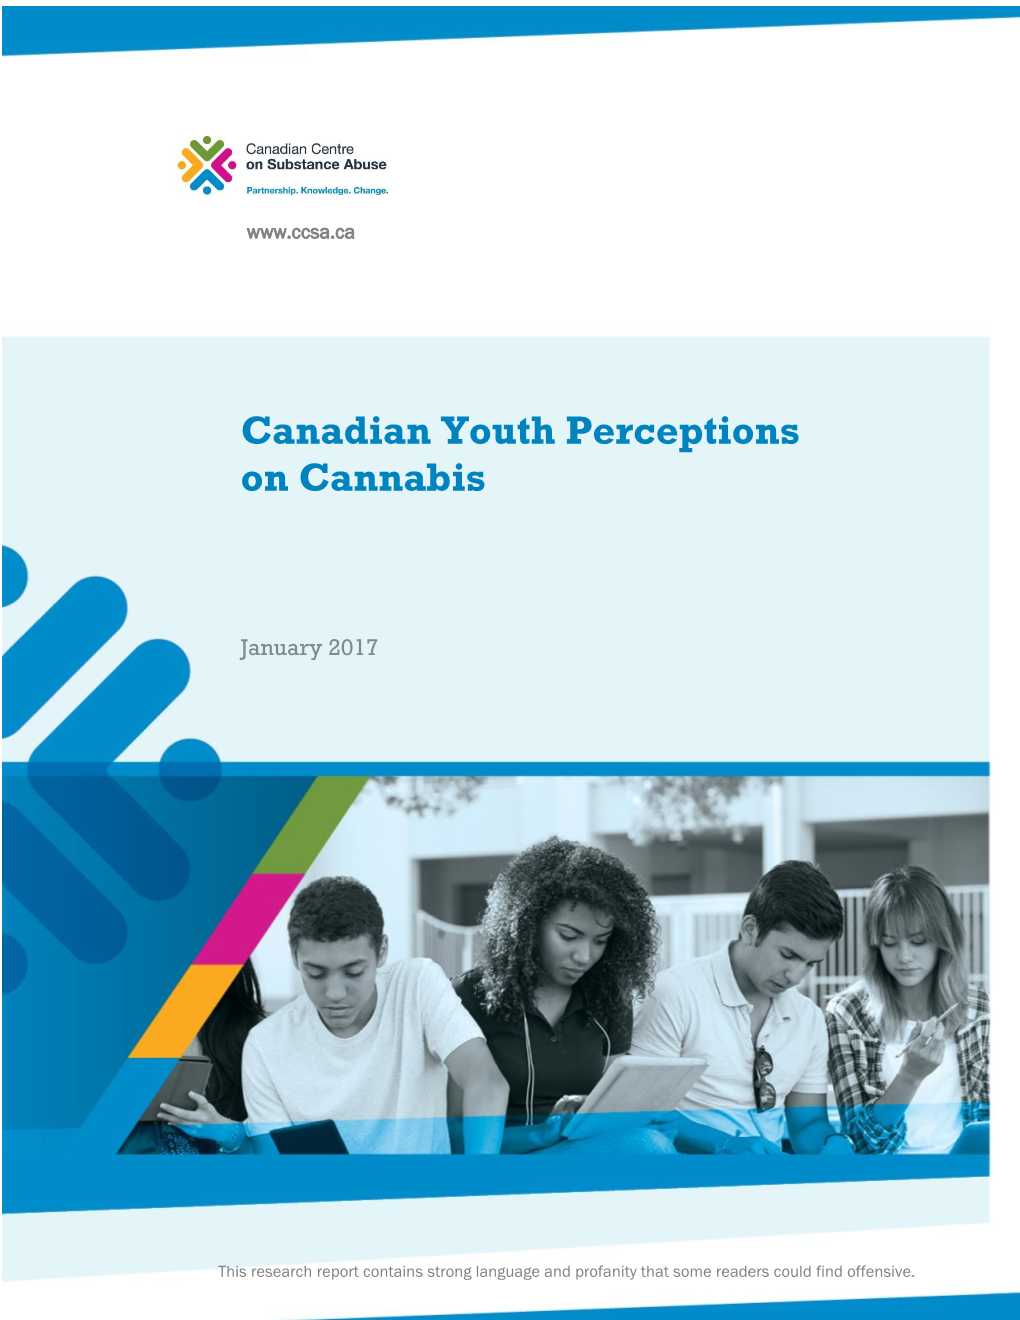 Canadian Youth Perceptions on Cannabis